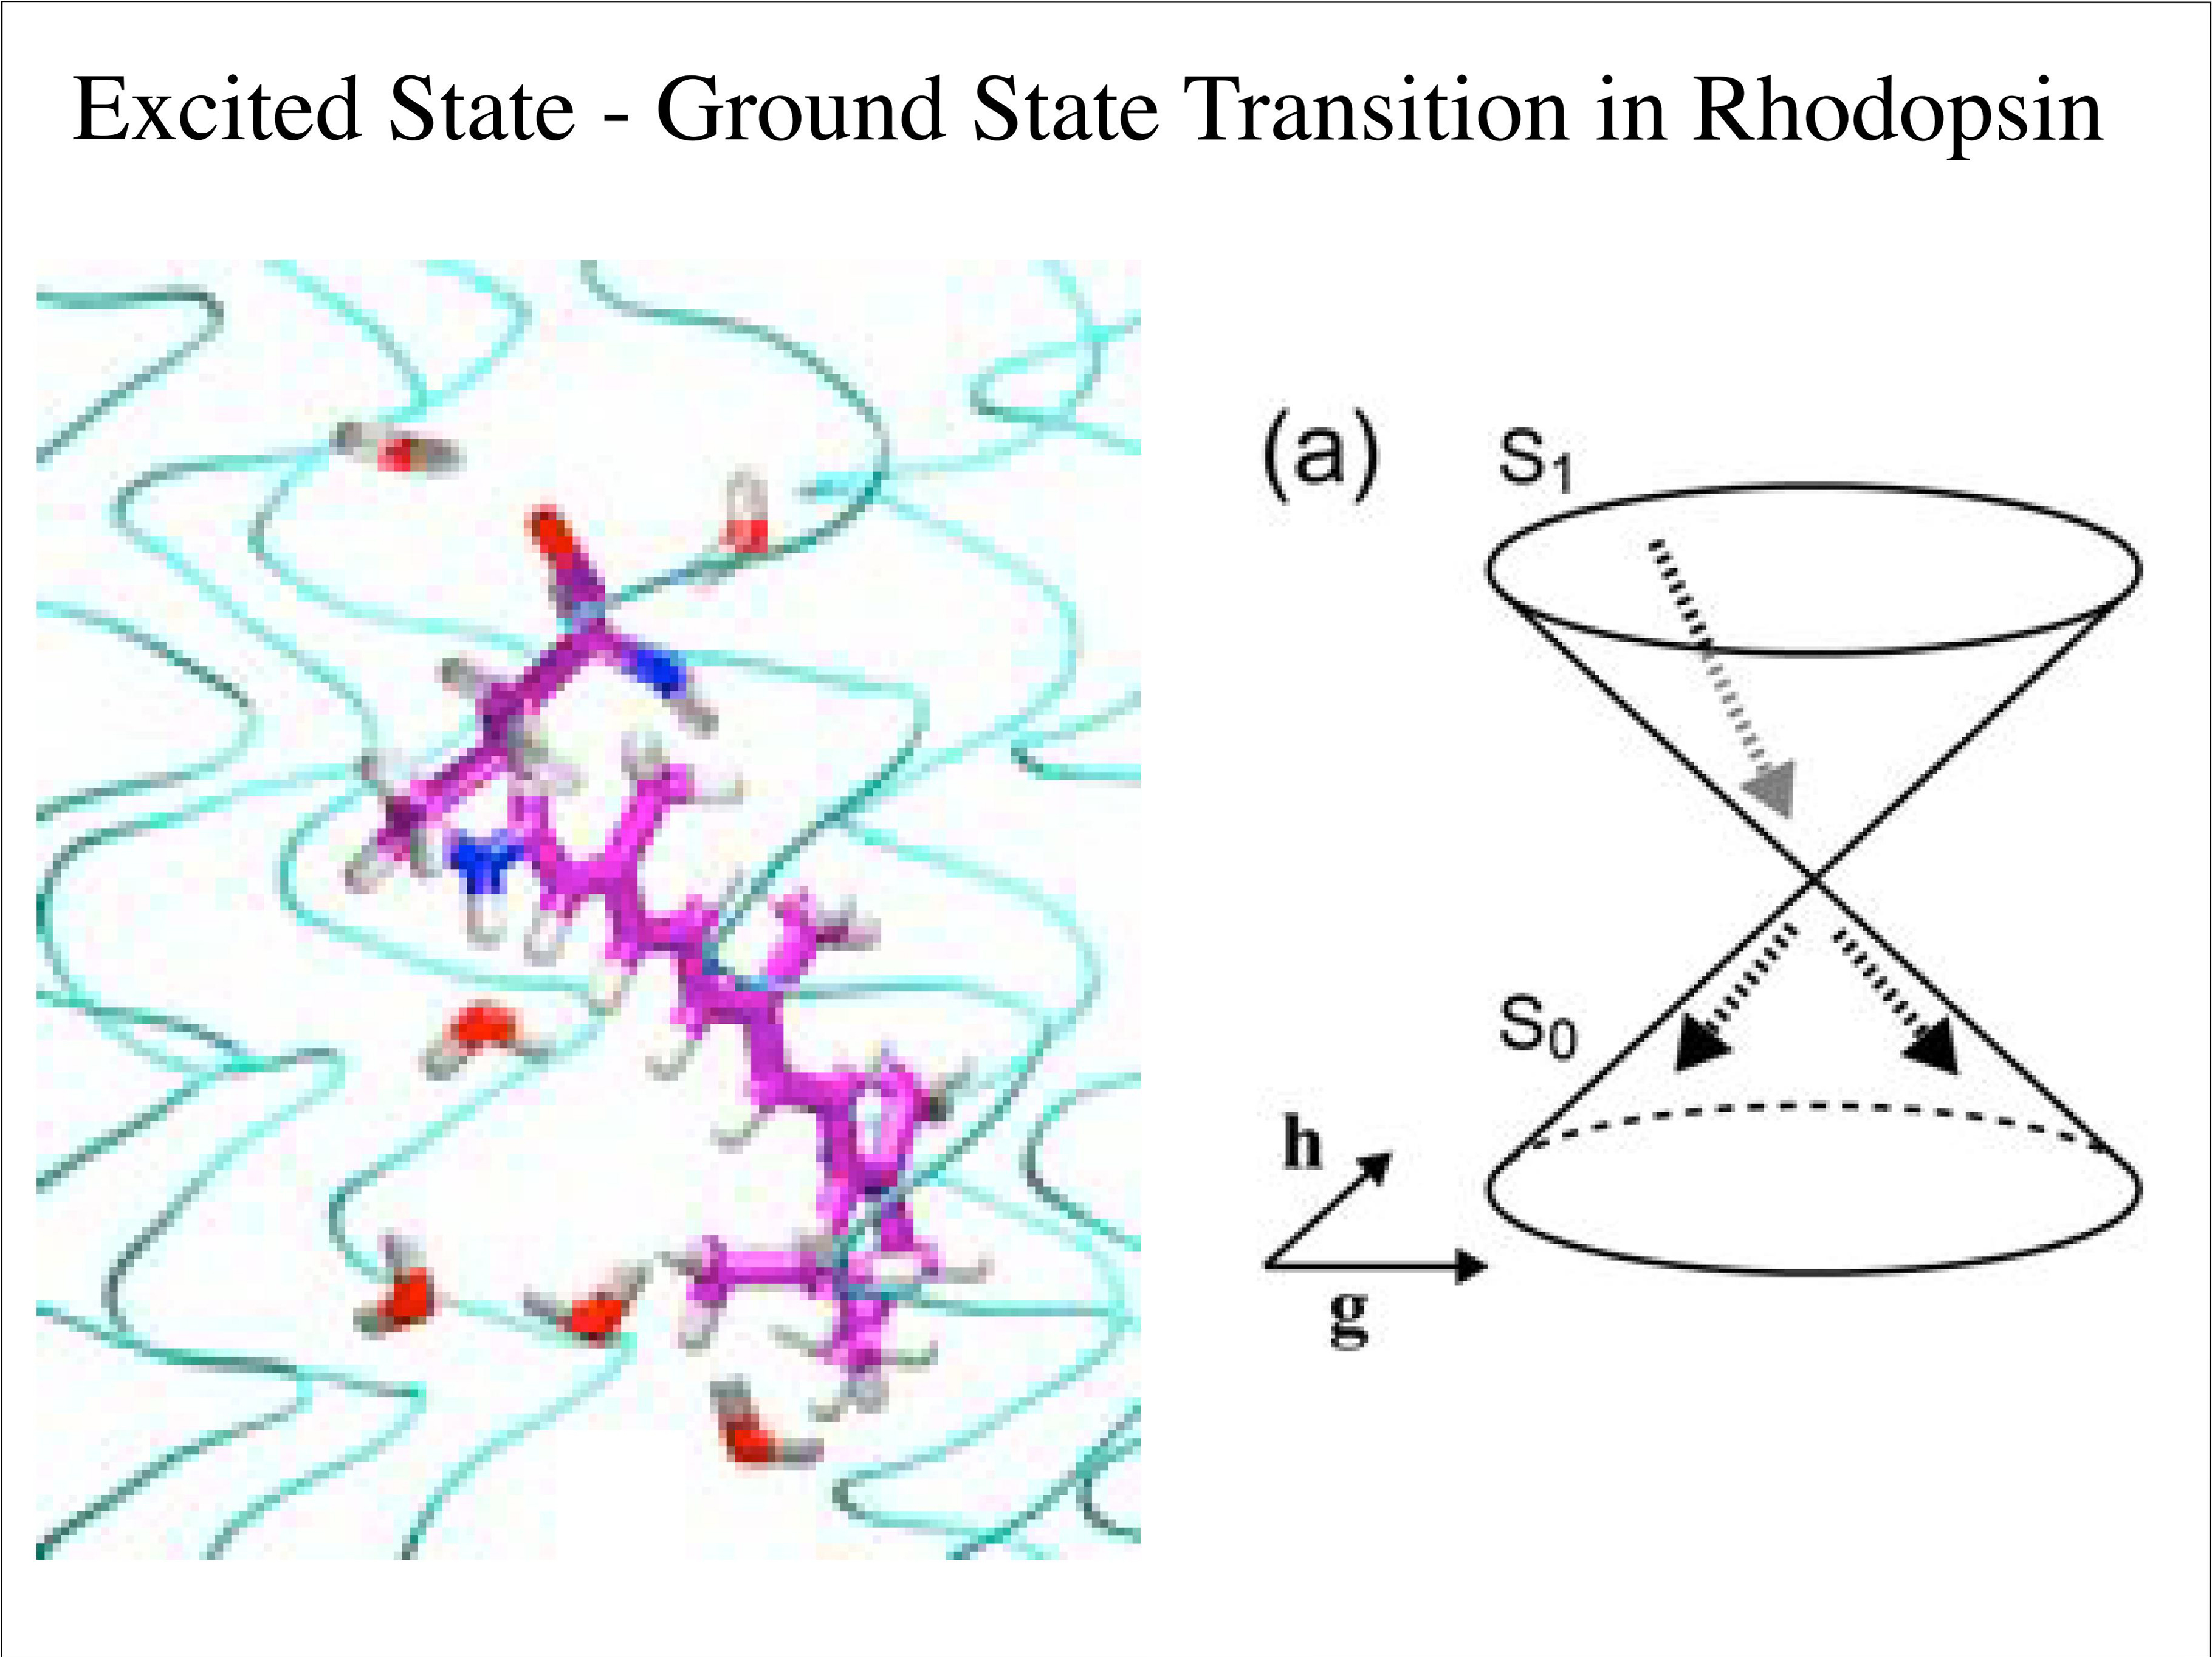 Excited State - Ground State Transition in Rhodopsin